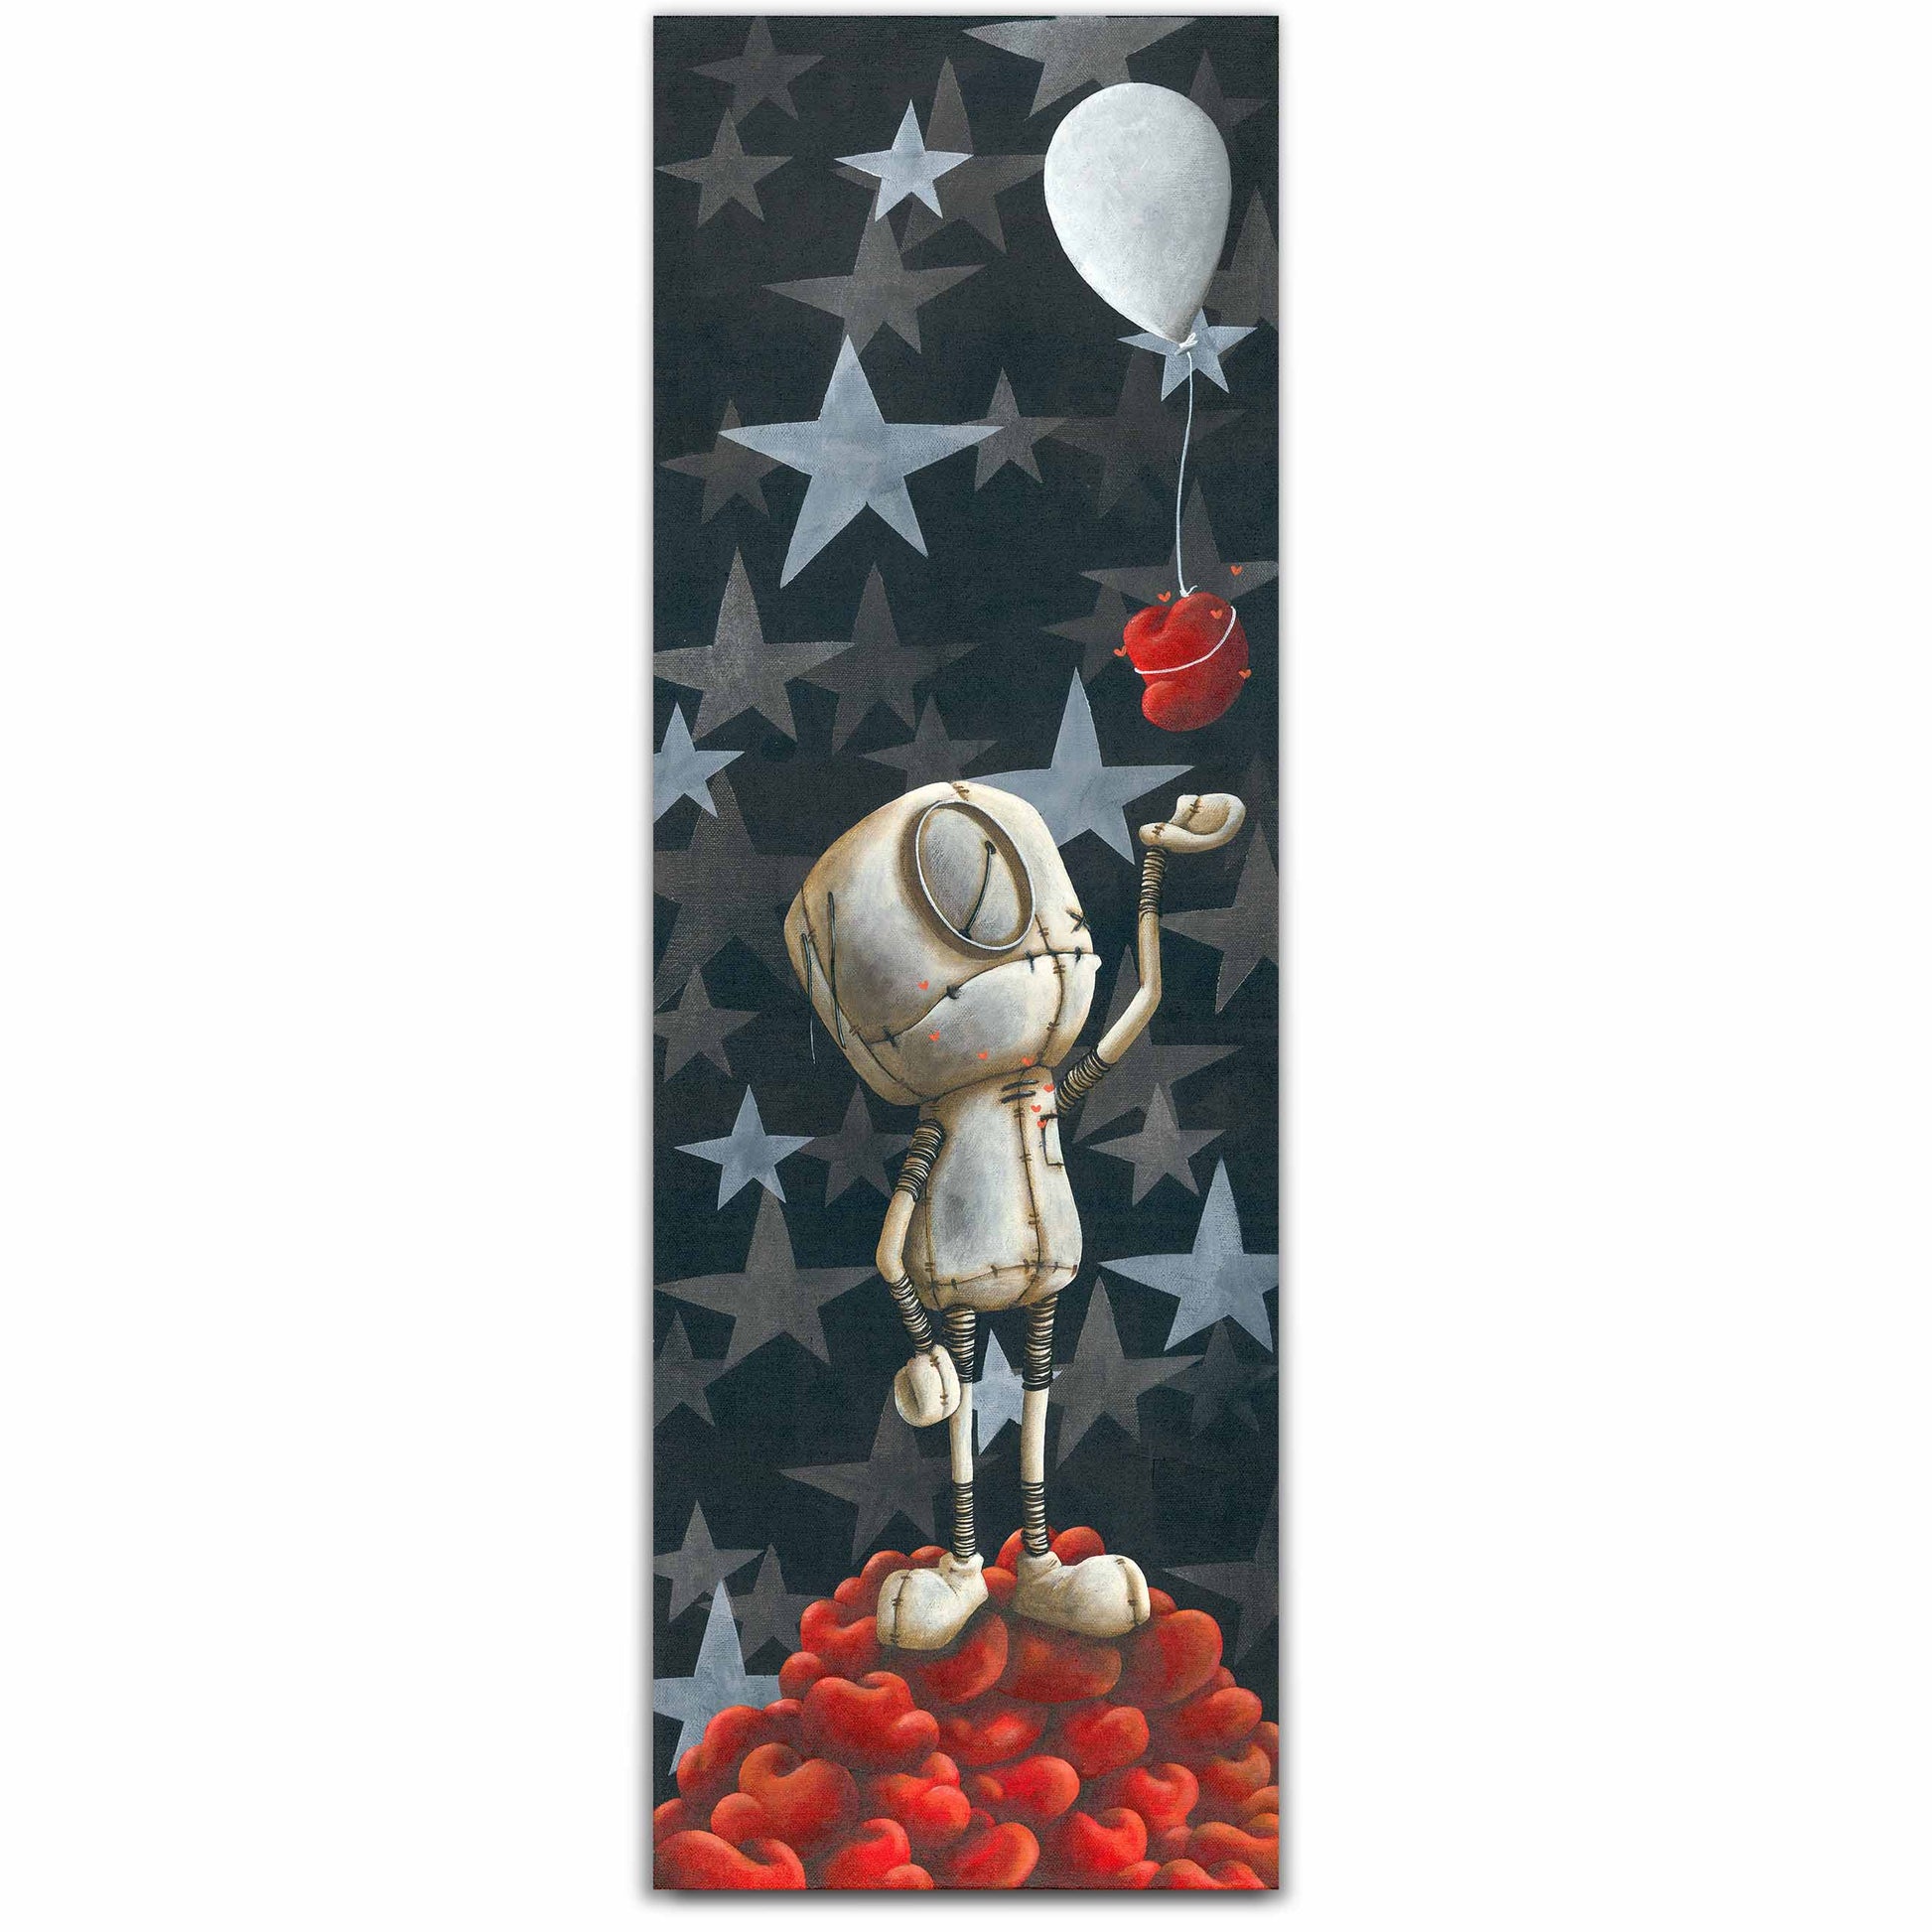 Fabio Napoleoni "Then You Came Along" Limited Edition Canvas Giclee